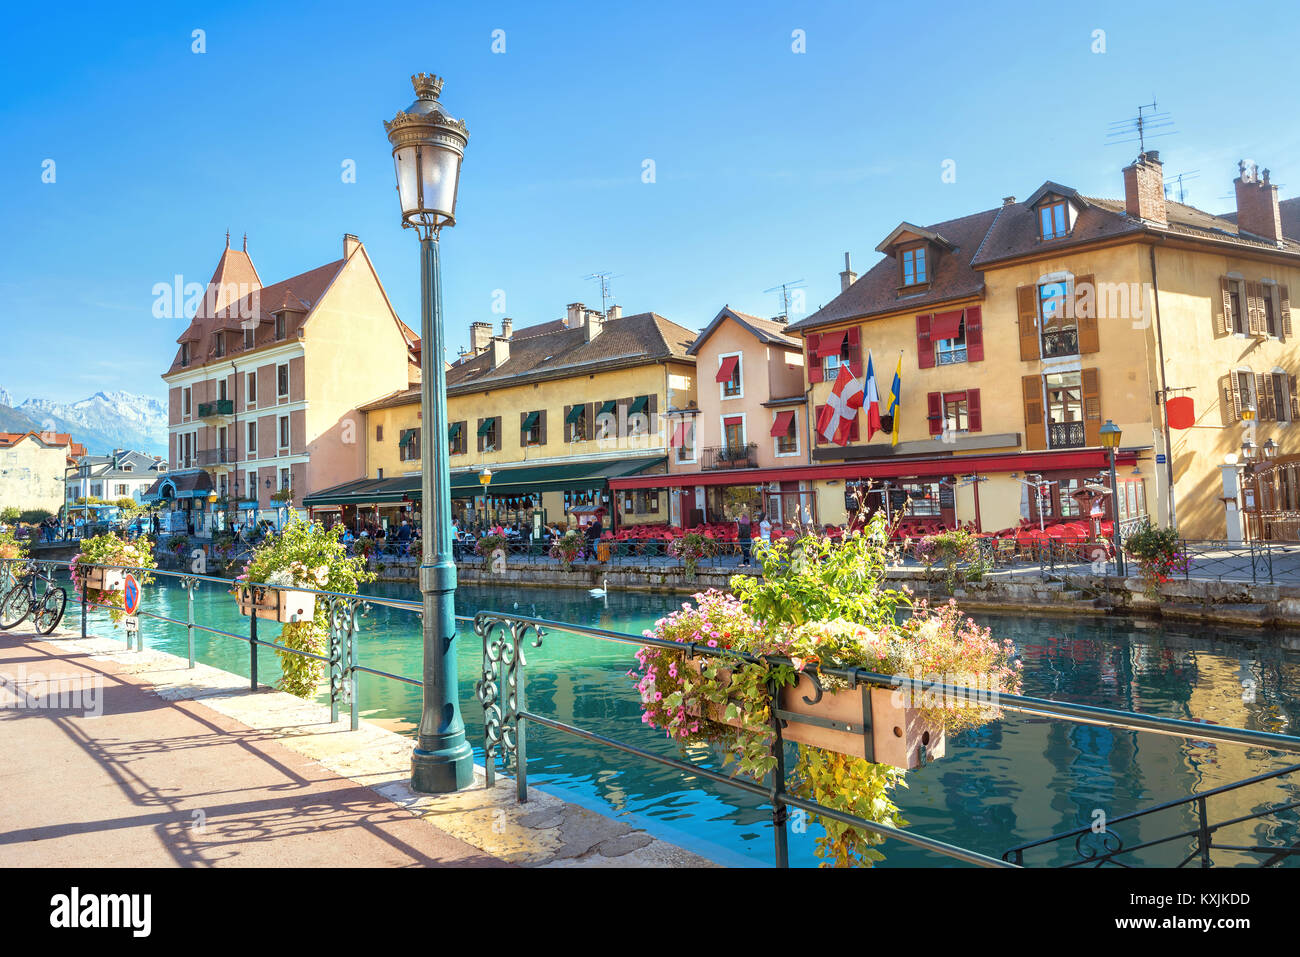 Cityscape with scenic old buildings in Annecy. French Alps, France Stock Photo